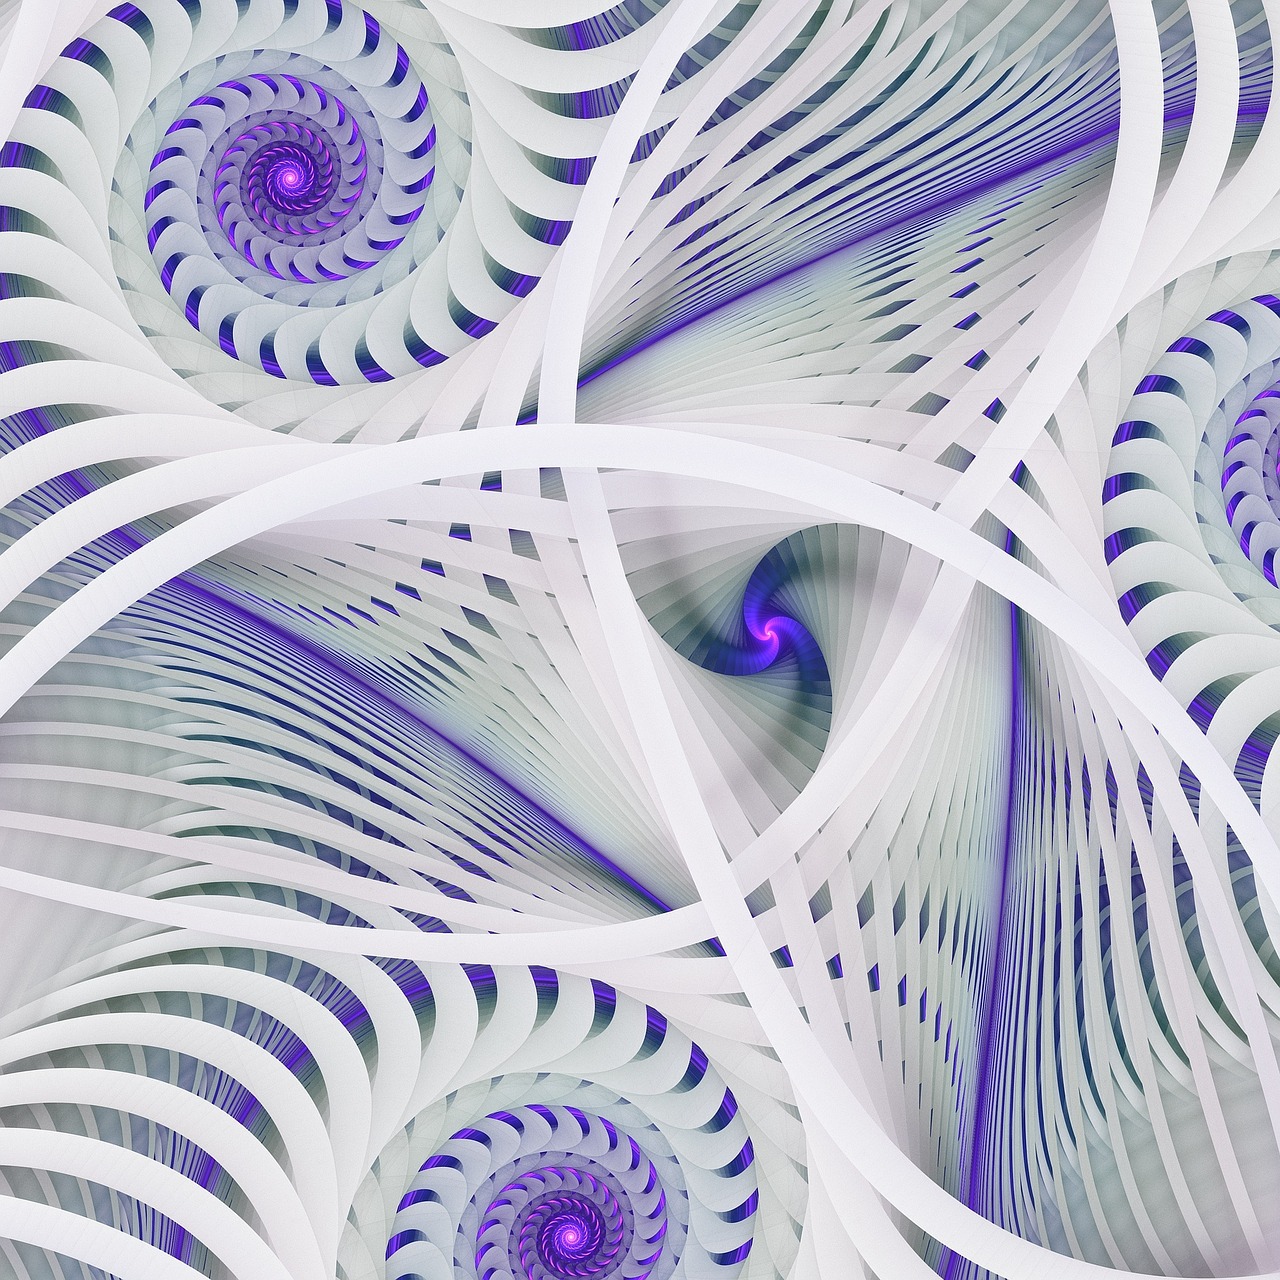 a computer generated image of a spiral design, digital art, inspired by Lorentz Frölich, purple eyes and white dress, lattice, silver and cool colors, orton effect intricate